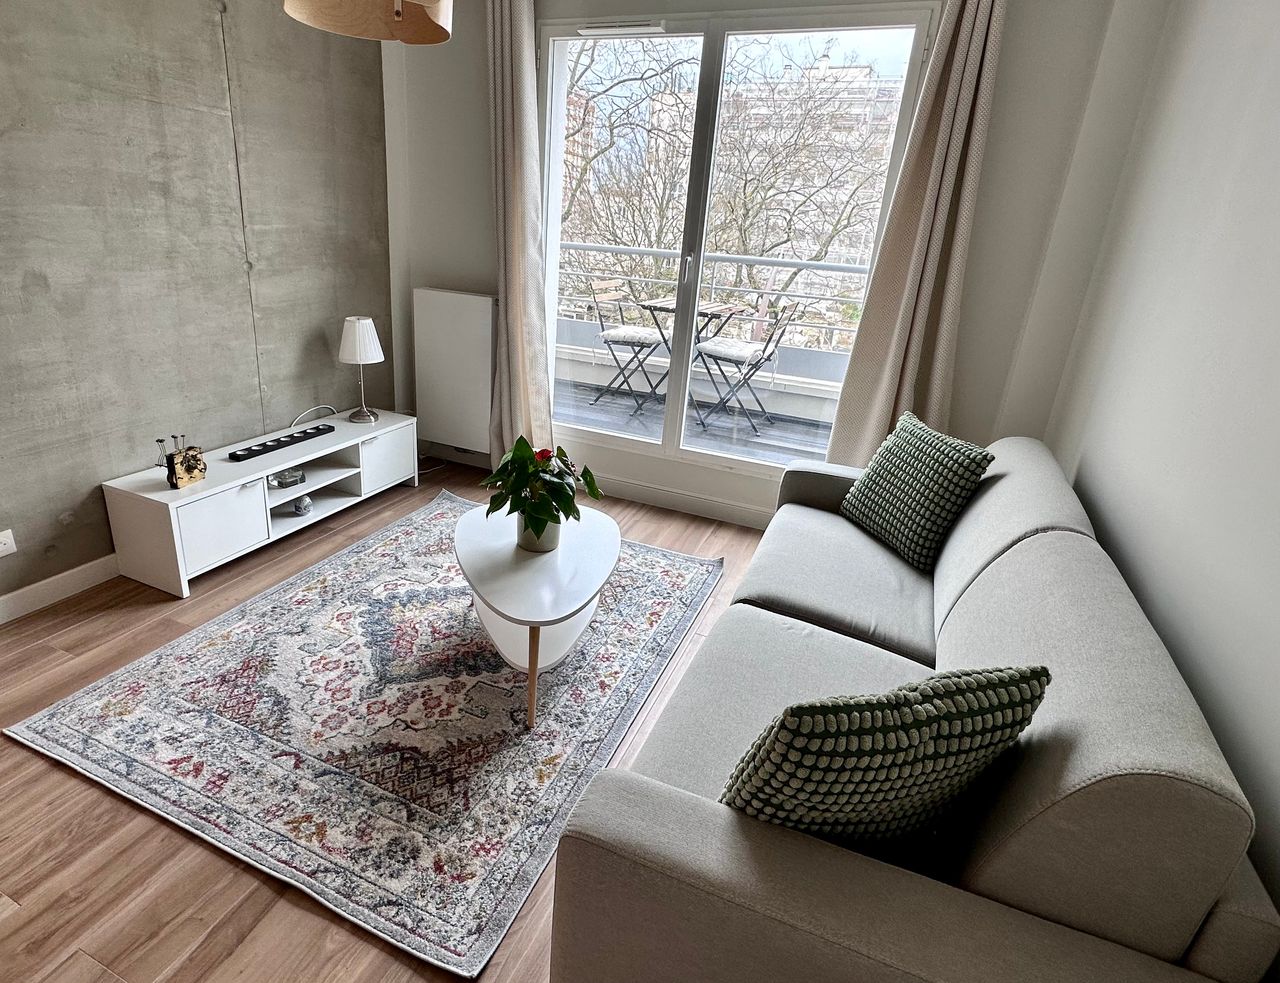 New and carefully furnished two-room apartment with a wonderful view of Paris